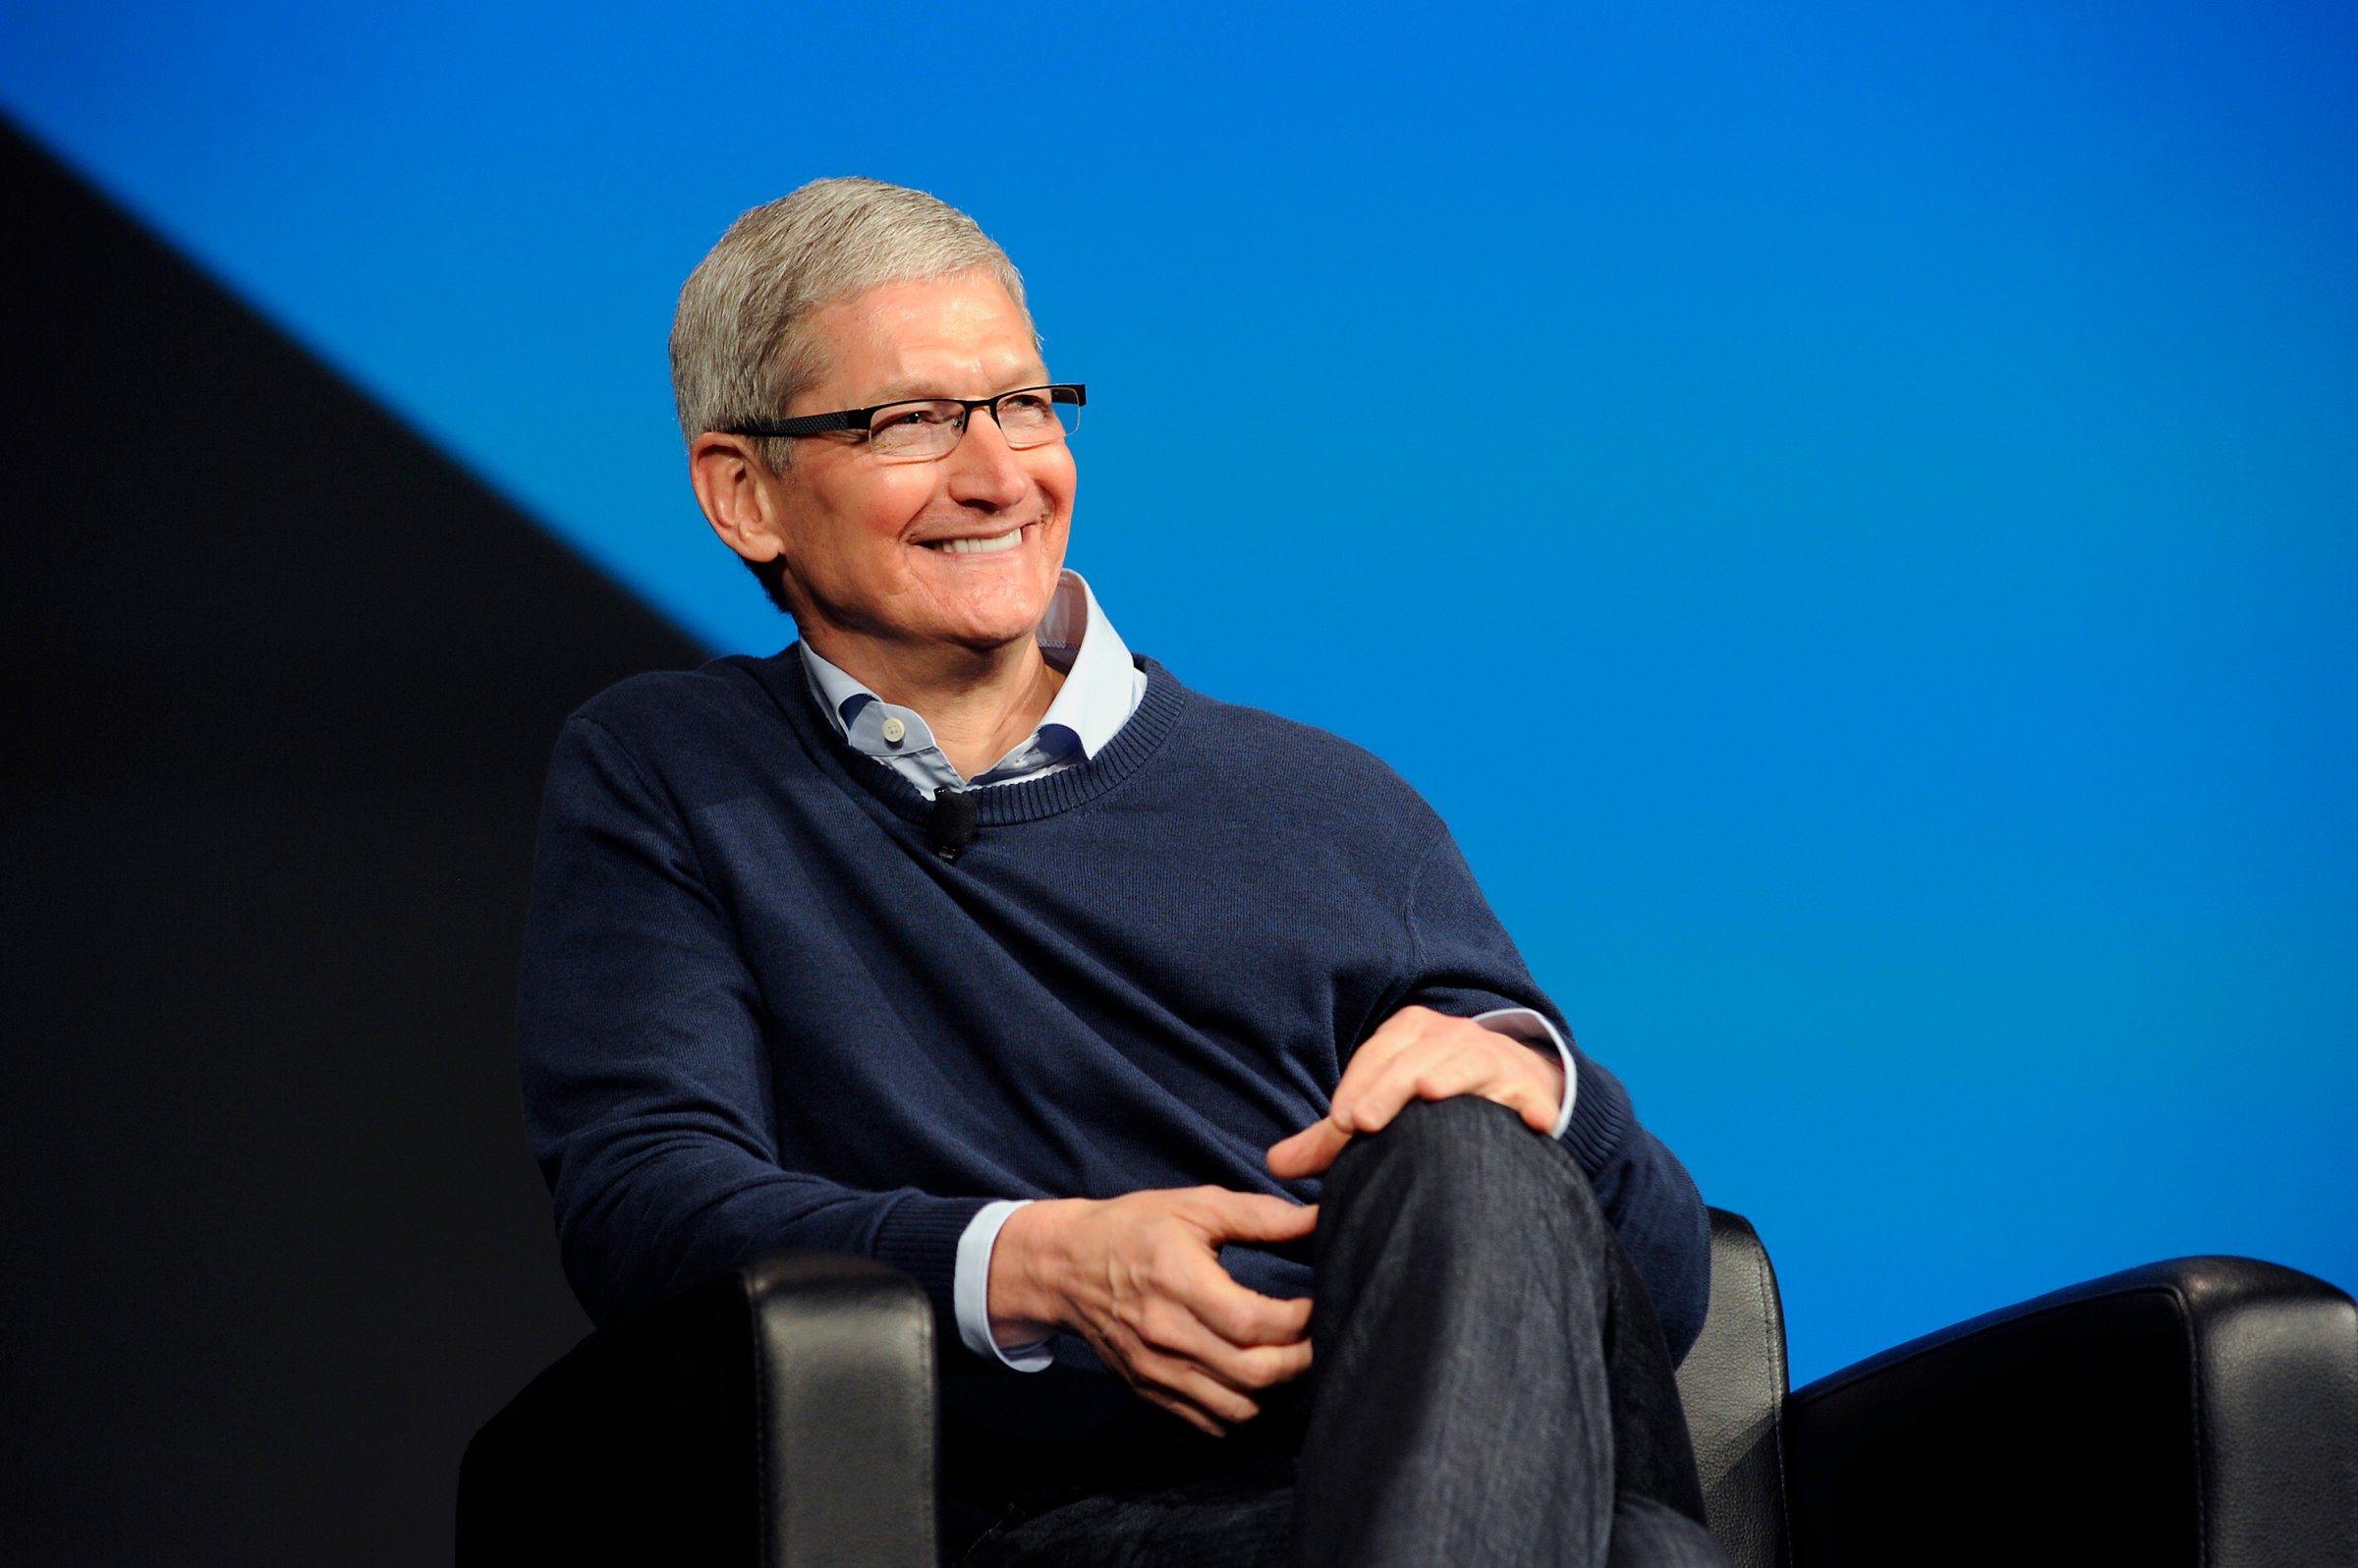 Tim Cook, CEO of Apple, sits on stage during Boxworks 2015 at the Moscone Center in San Francisco, California, U.S., on Tuesday, September 29, 2015. Photographer: Michael Short/Bloomberg